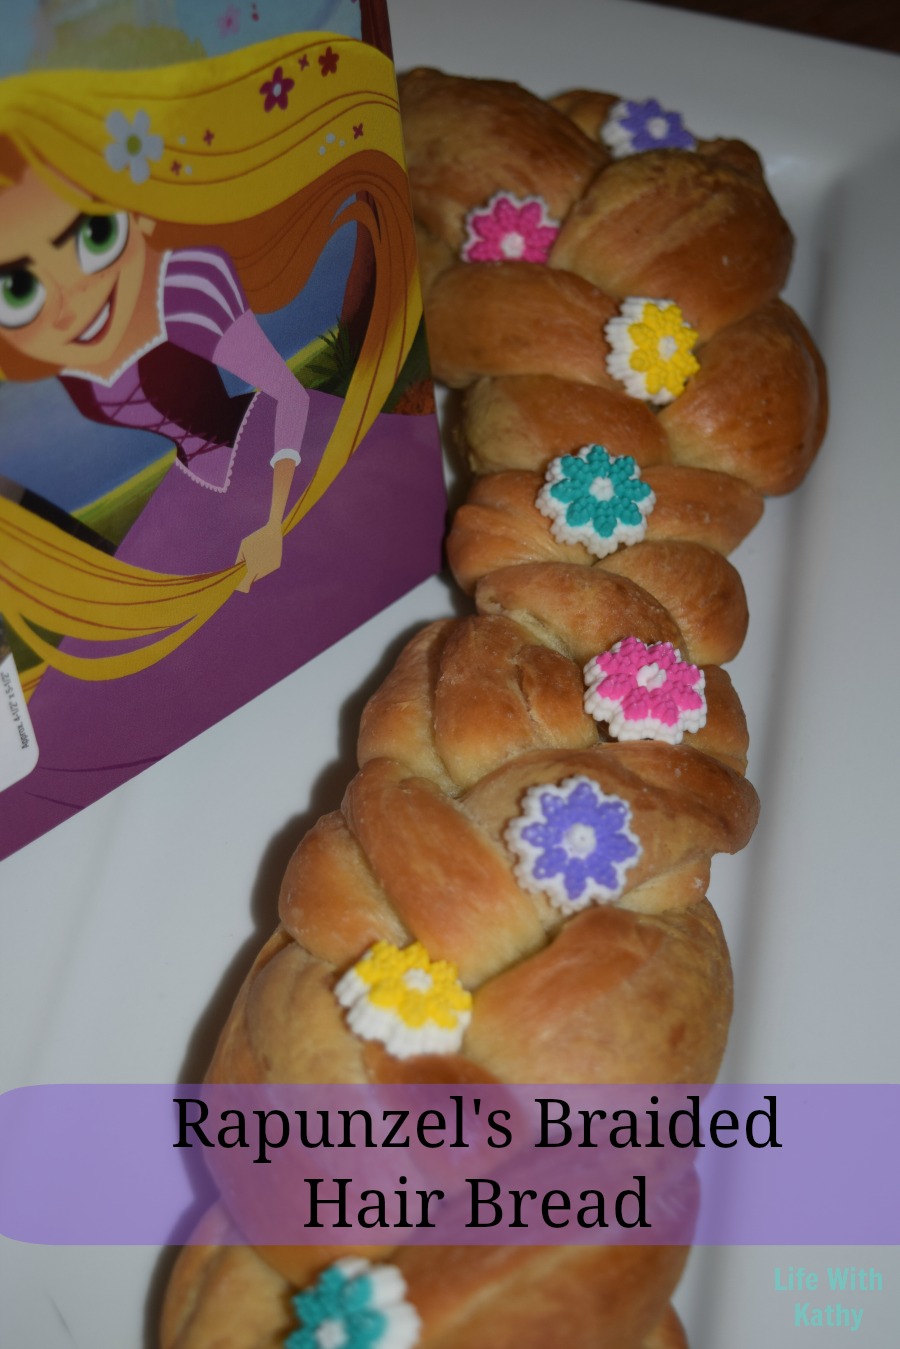 Rapunzel Braided Hair Bread-Inspired by Tangled Before Ever After - Life  With Kathy